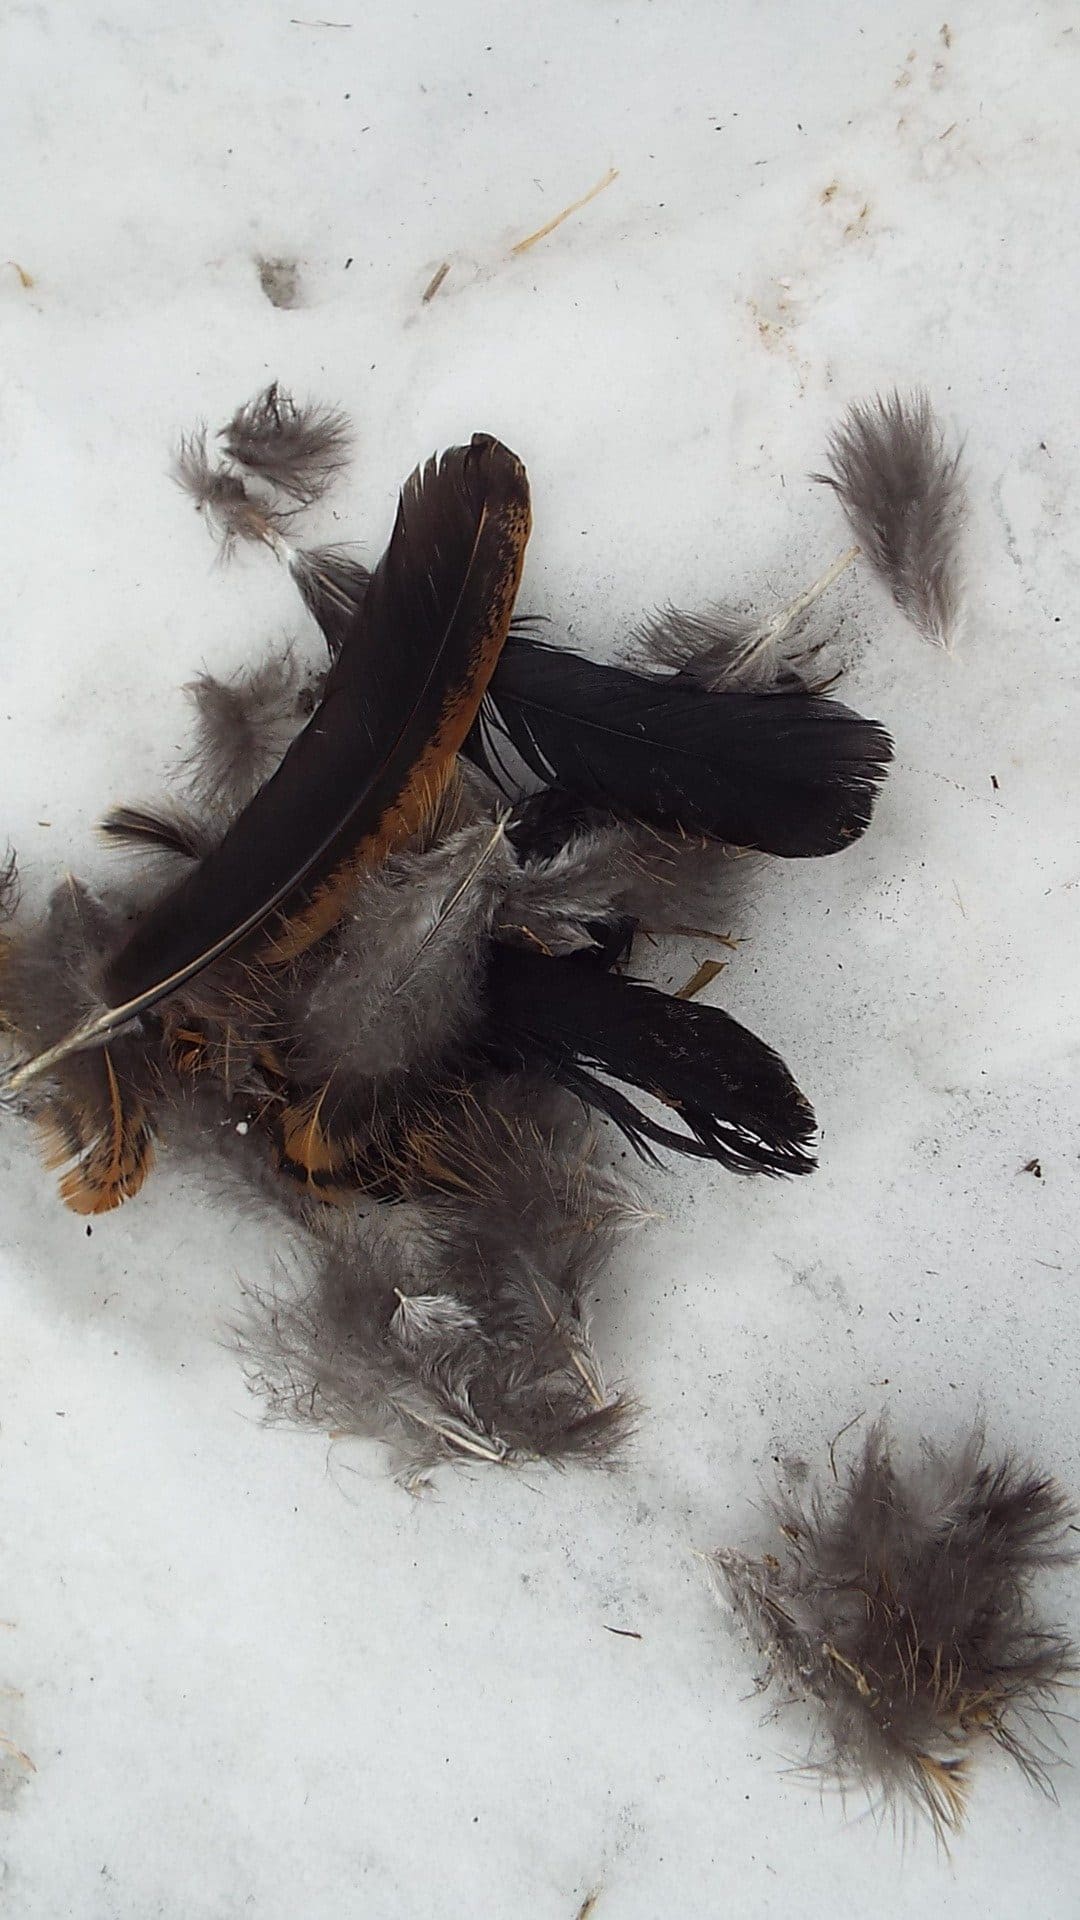 Piles of feathers found in the snow.